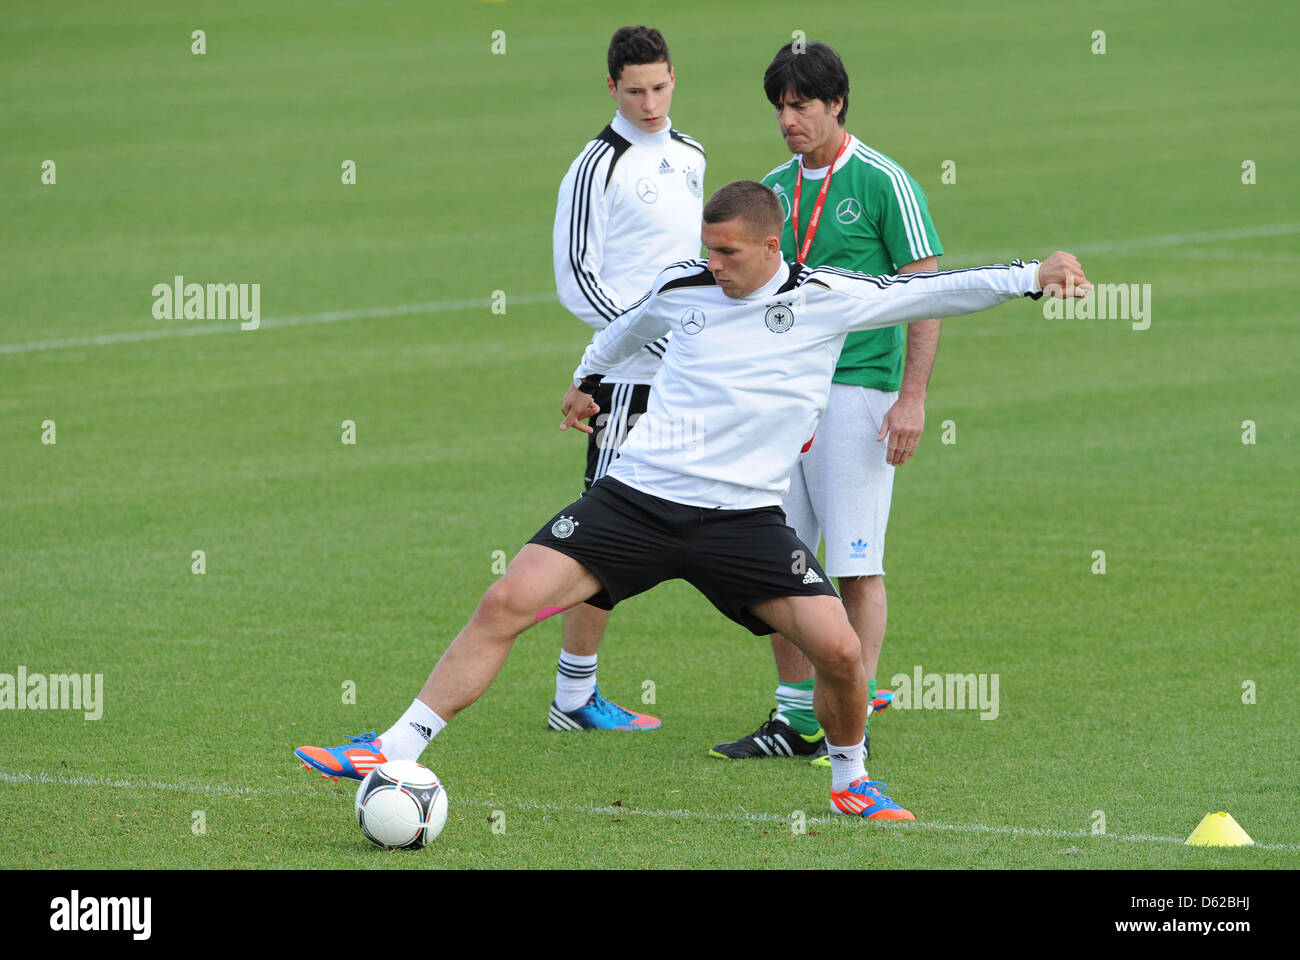 Germany's Lukas Podolski (front) practices under the eyes of head coach Joachim Loew and teammate Julian Draxler on a pitch near Callian, France, 18 May 2012. The German national team is preparing for the Euro 2012 in southern France until 20 May. Photo: ANDREAS GEBERT Stock Photo